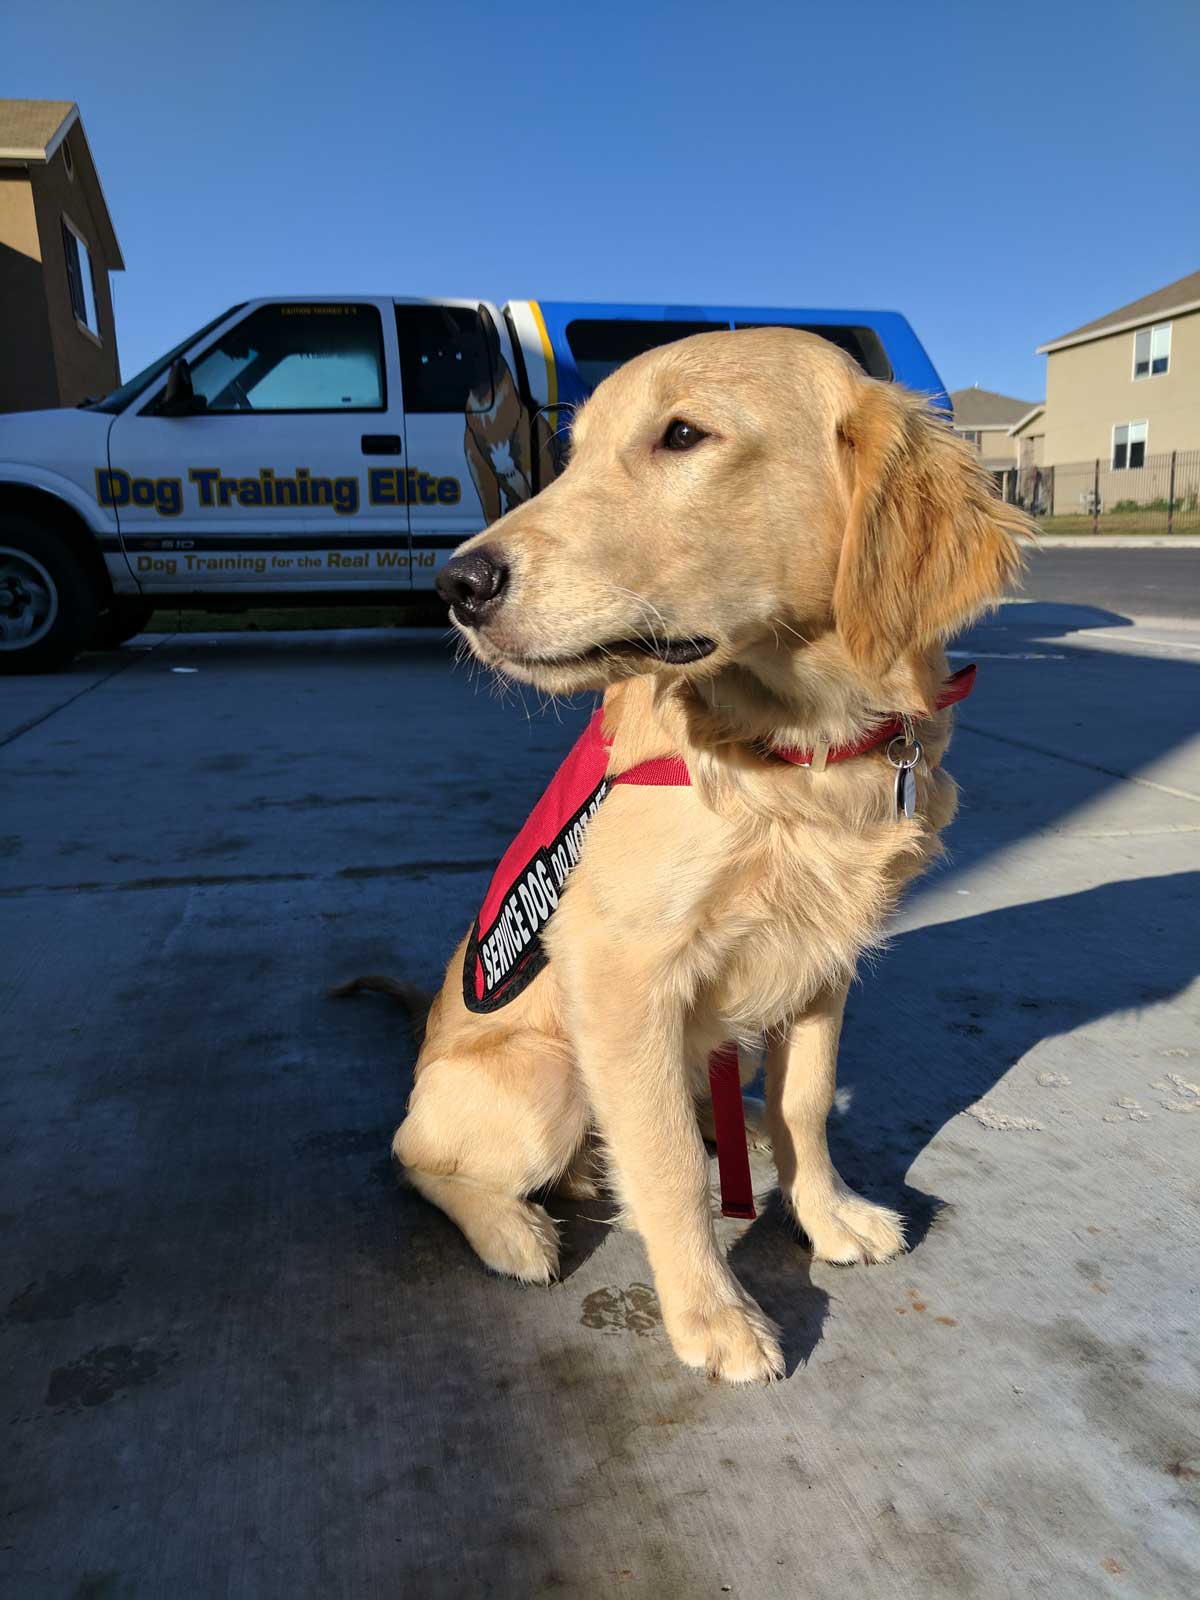 Dog Training Elite Utah County is proud to have the highest rated service dog training programs near you in Utah County.